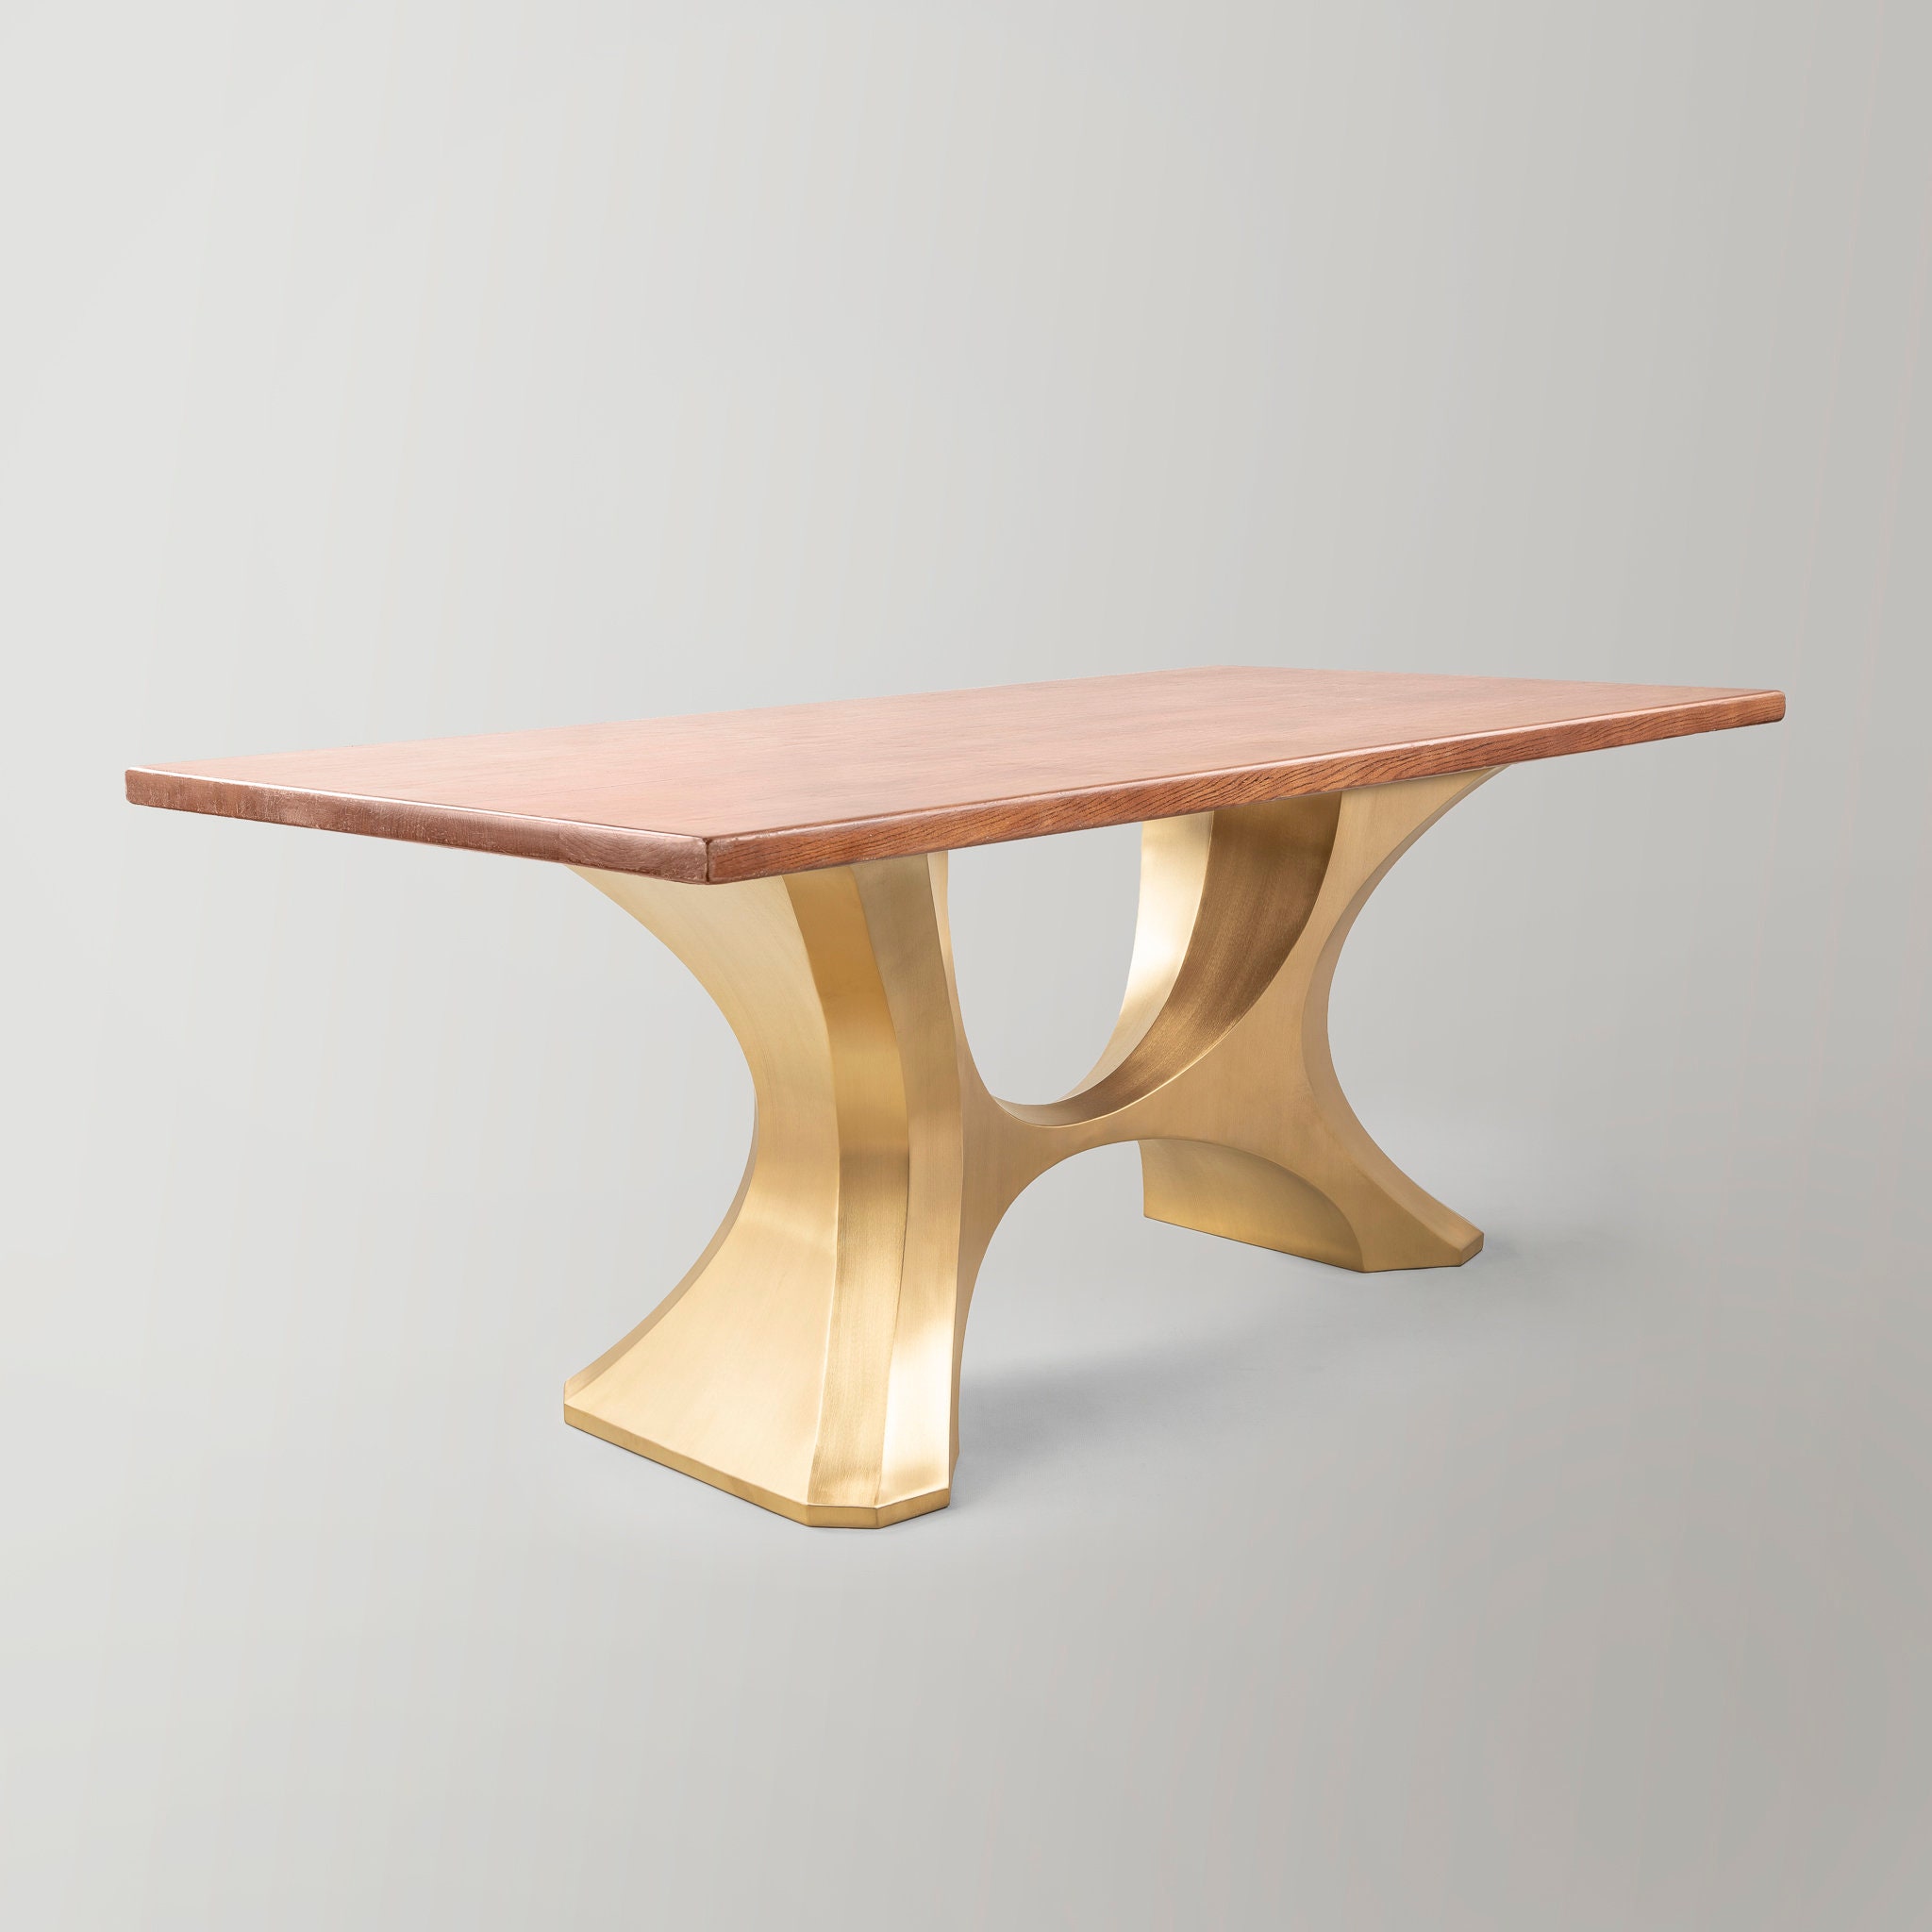 chuangdi table base cafe table legs